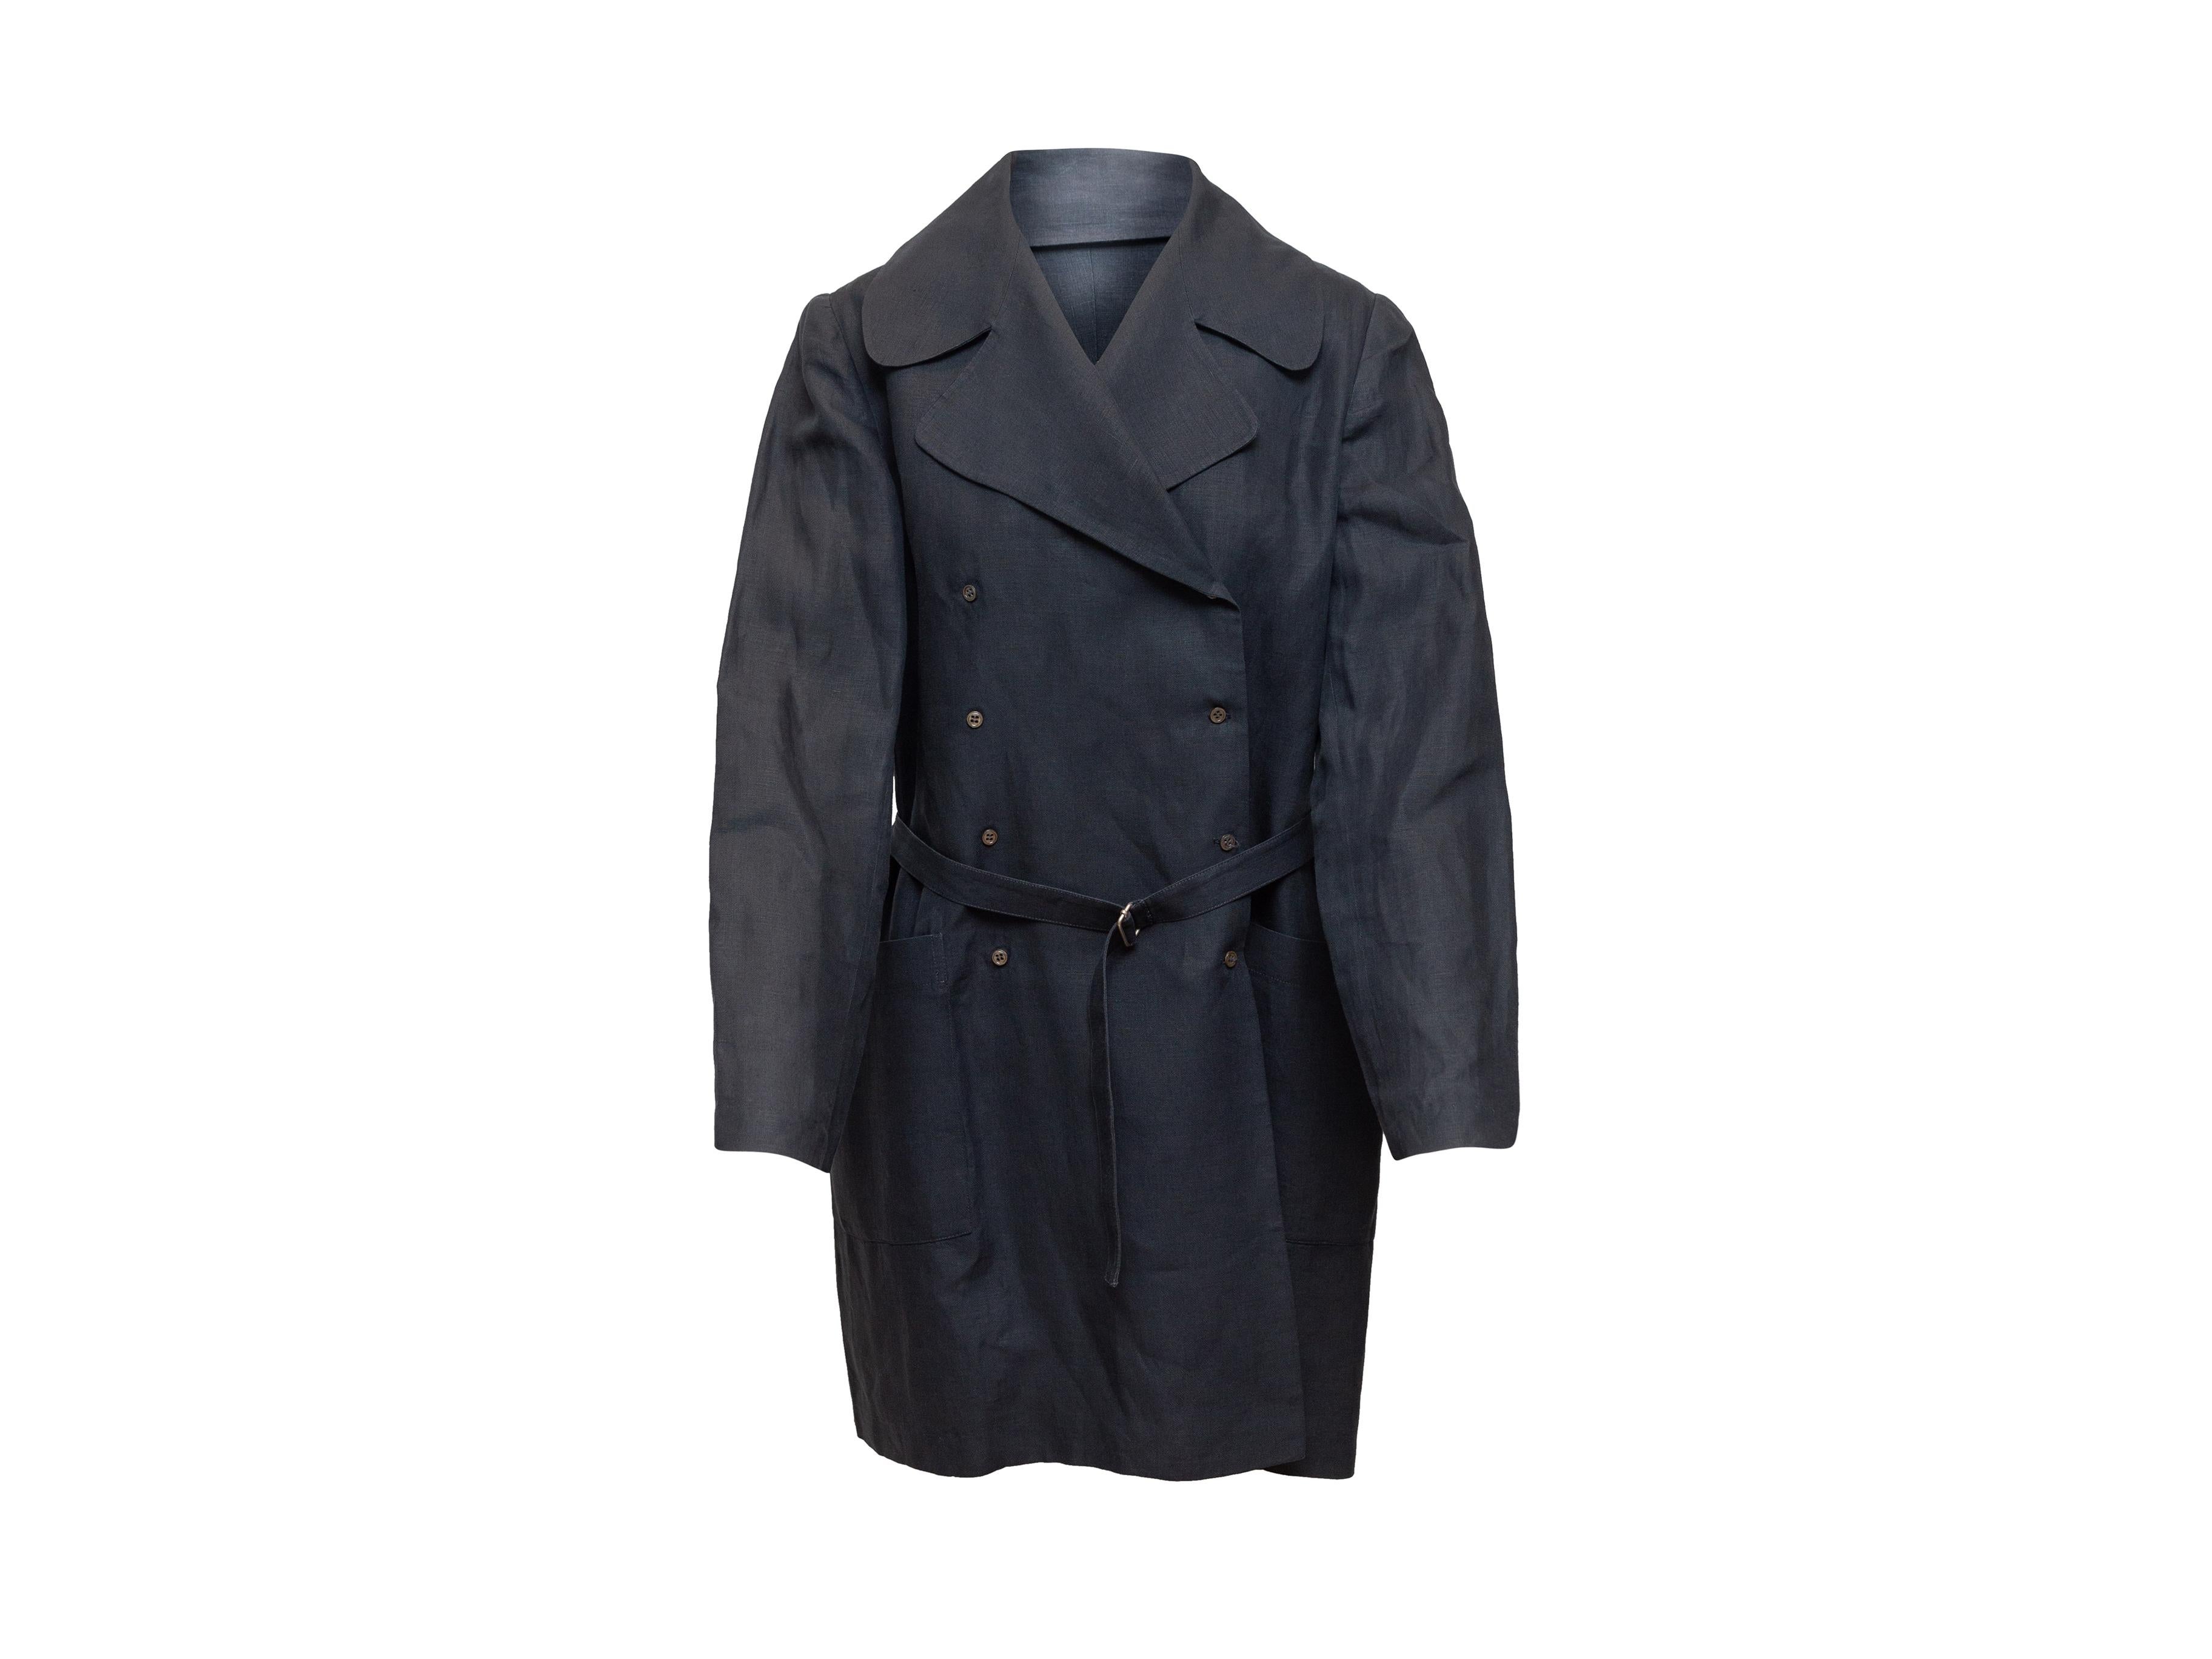 Product details: Navy linen double-breasted coat by Morgane Le Fay. Notched lapel. Dual hip pockets. Belt at waist. Button closures at front. 36